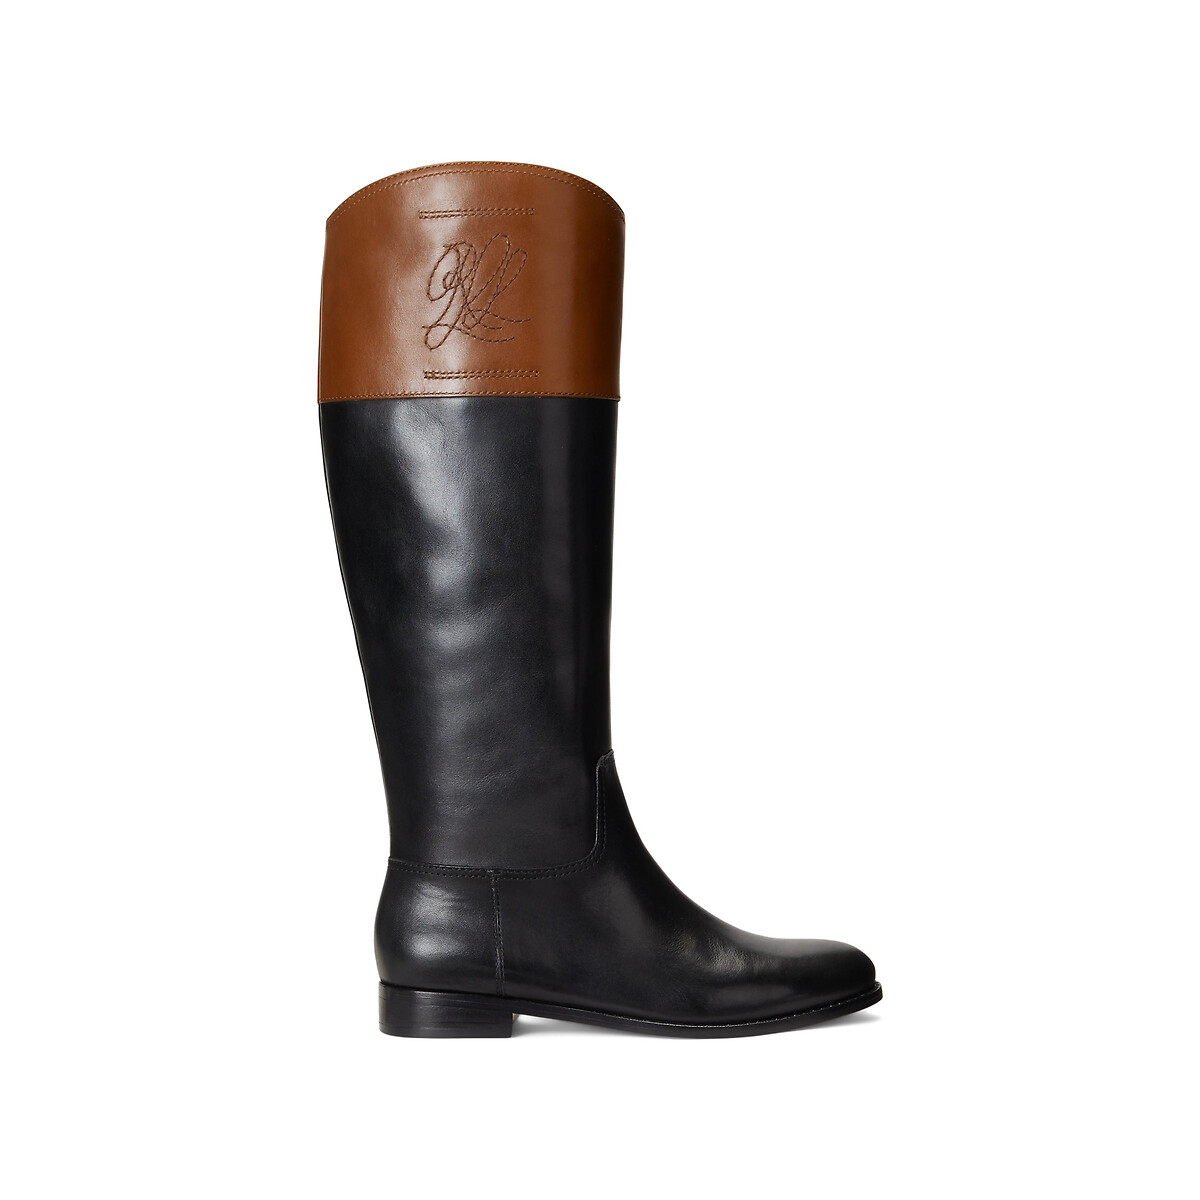 Two-Tone Riding Boots in Leather with Flat Heel